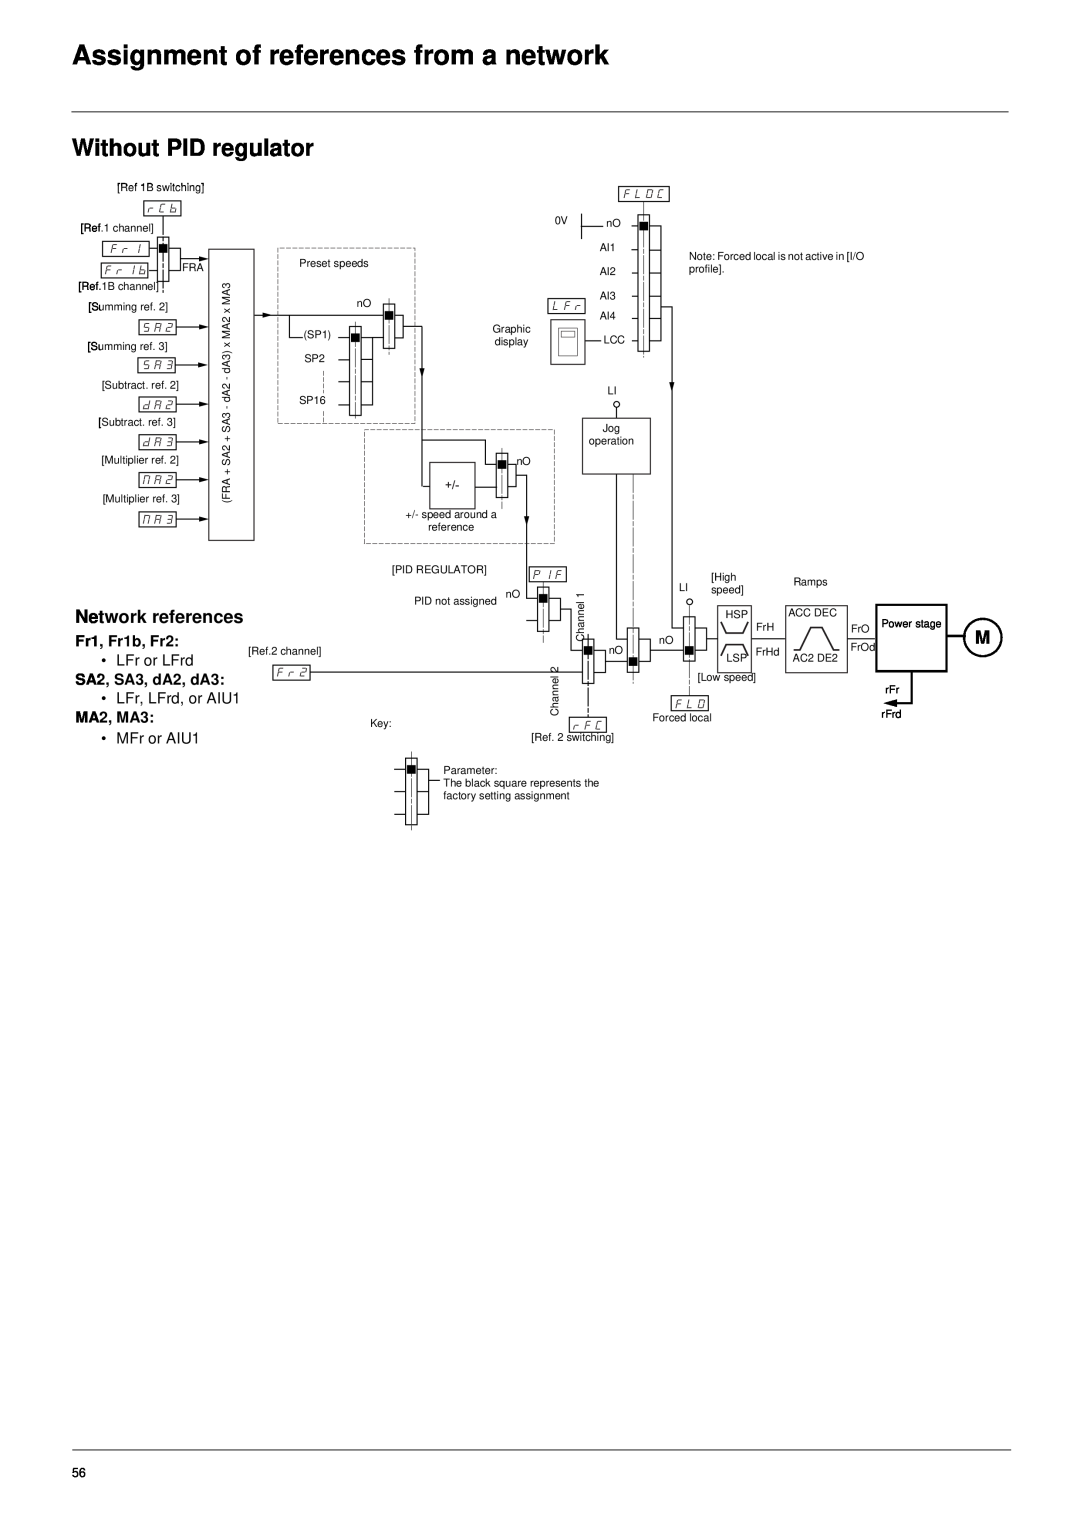 Schneider Electric 61 Without PID regulator, Network references, Assignment of references from a network, Fr1, Fr1b, Fr2 